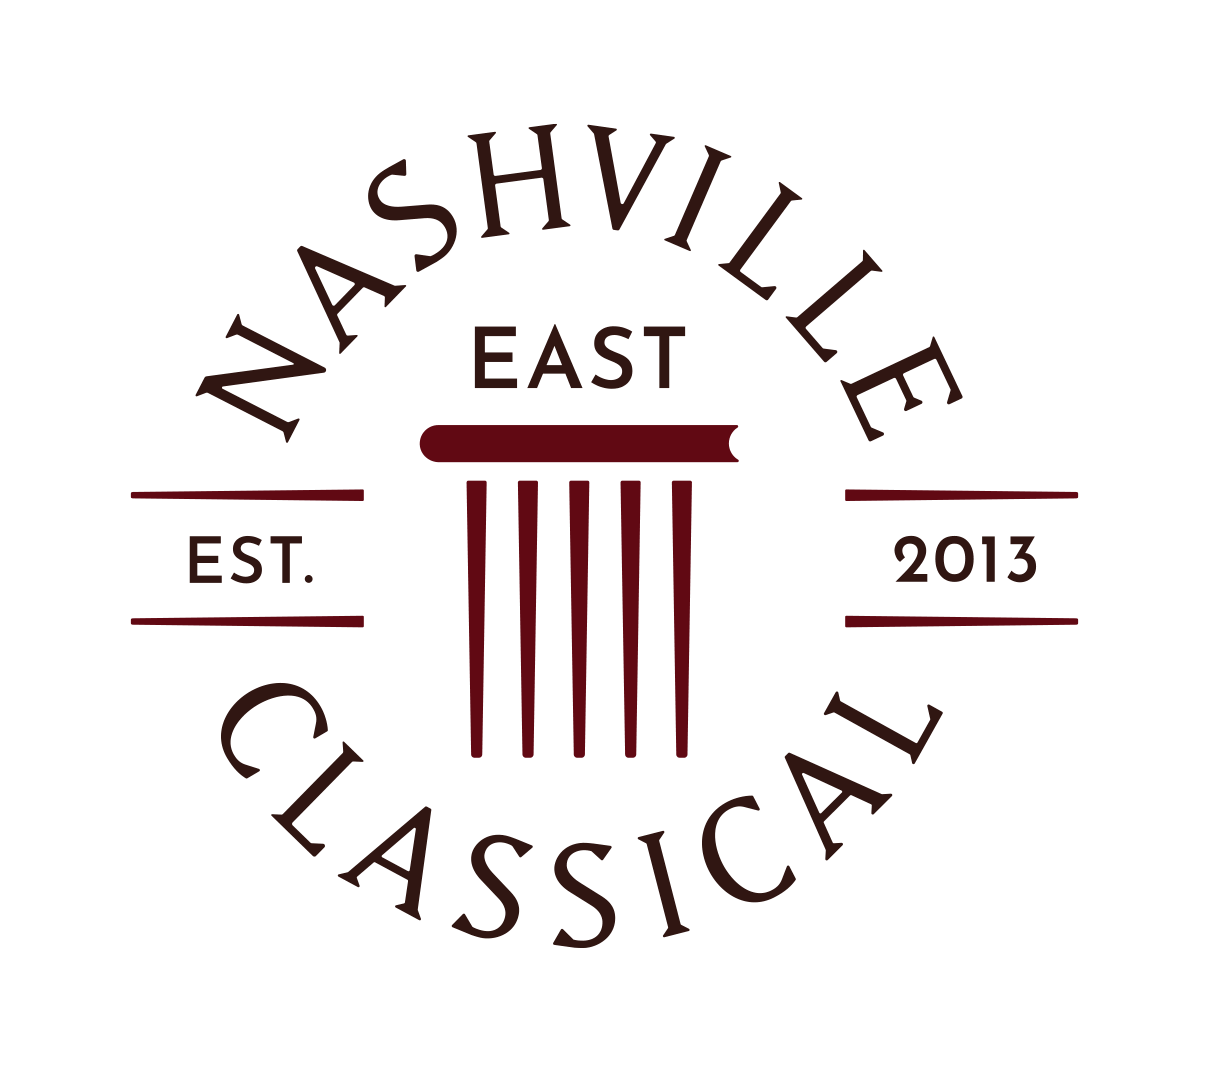 Circular logo mark for Nashville Classical Charter School as updated identity designed by ST8MNT